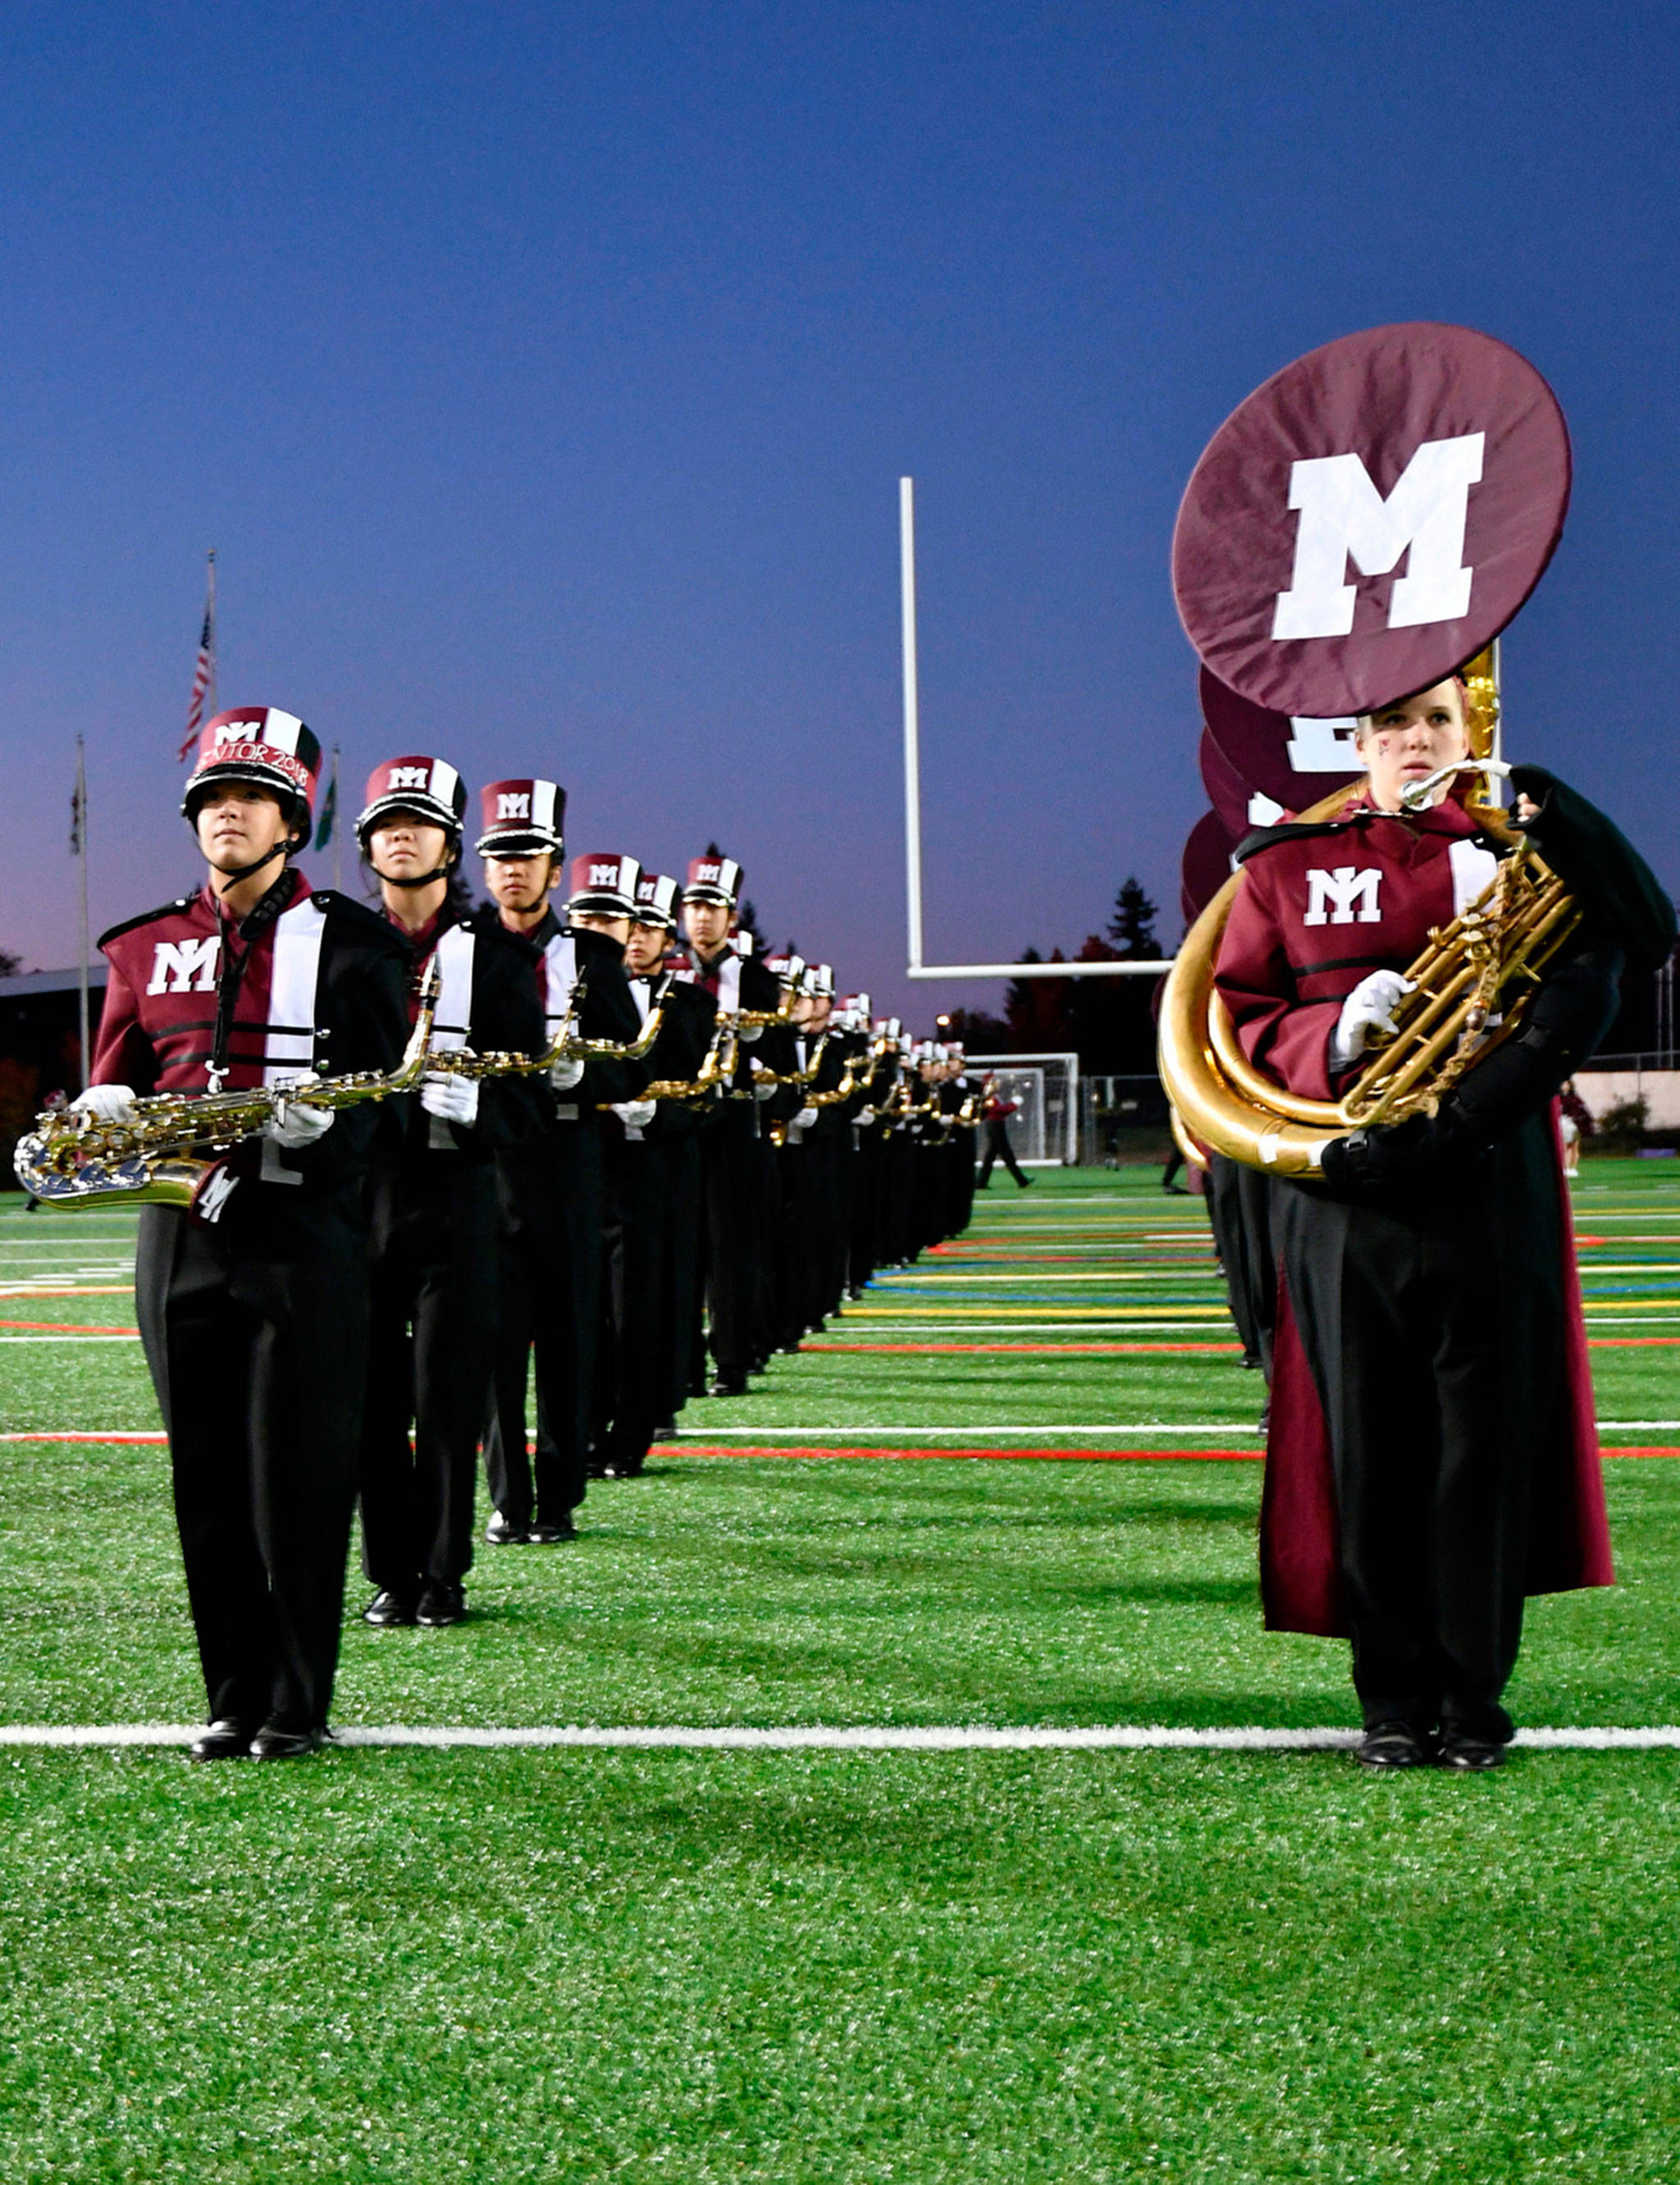 Musicians take the field for All Island Band Night